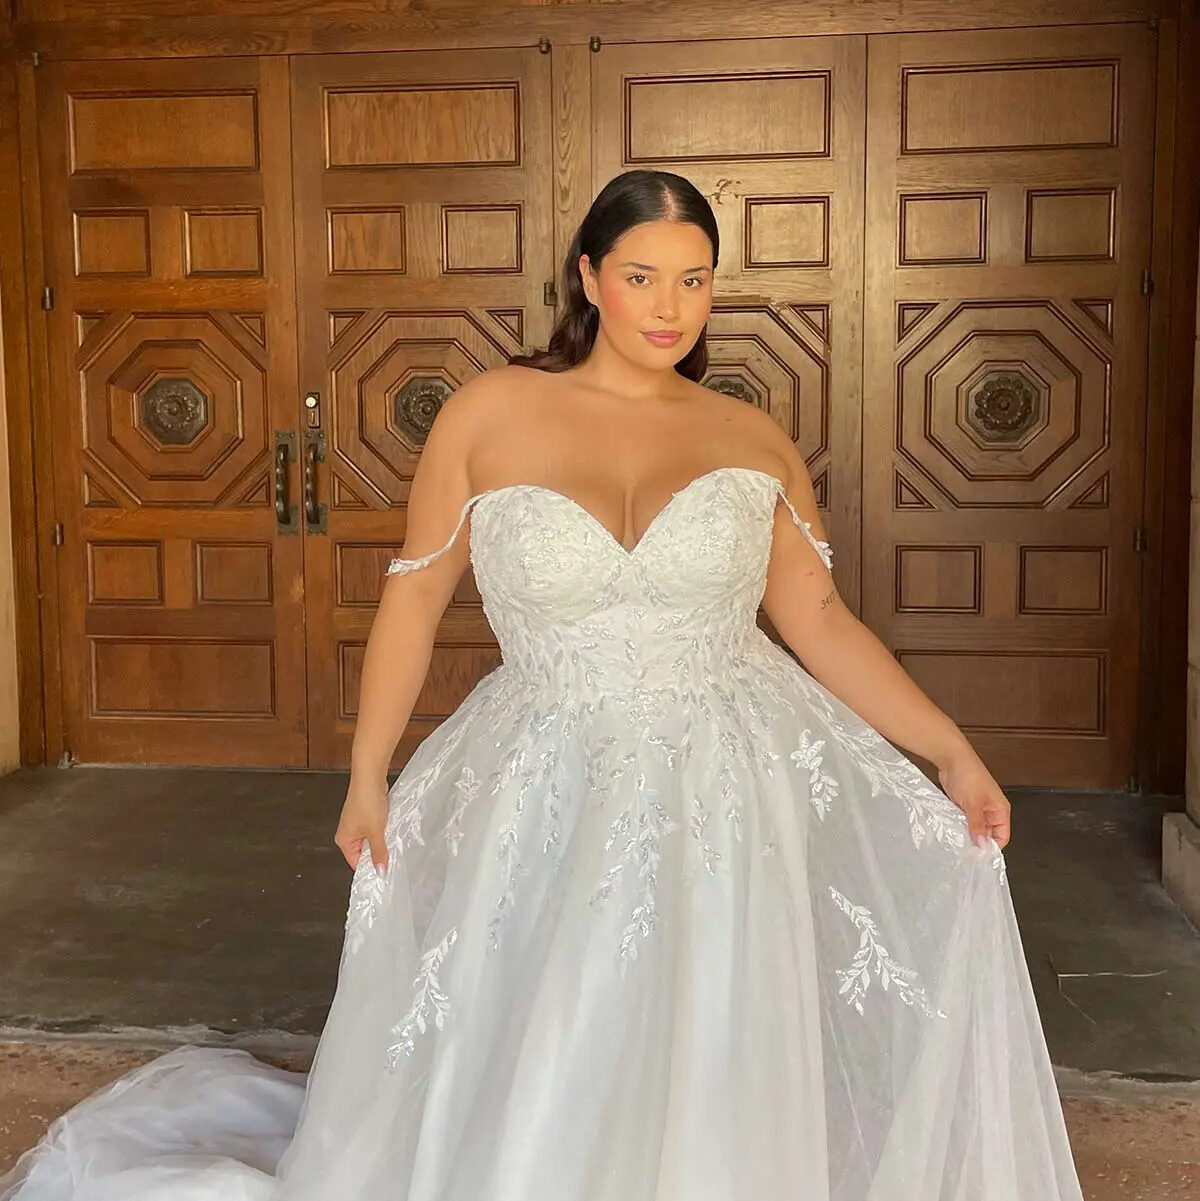 Latina bride wearing an off the shoulder wedding dress and standing in front of antique wooden doors. 